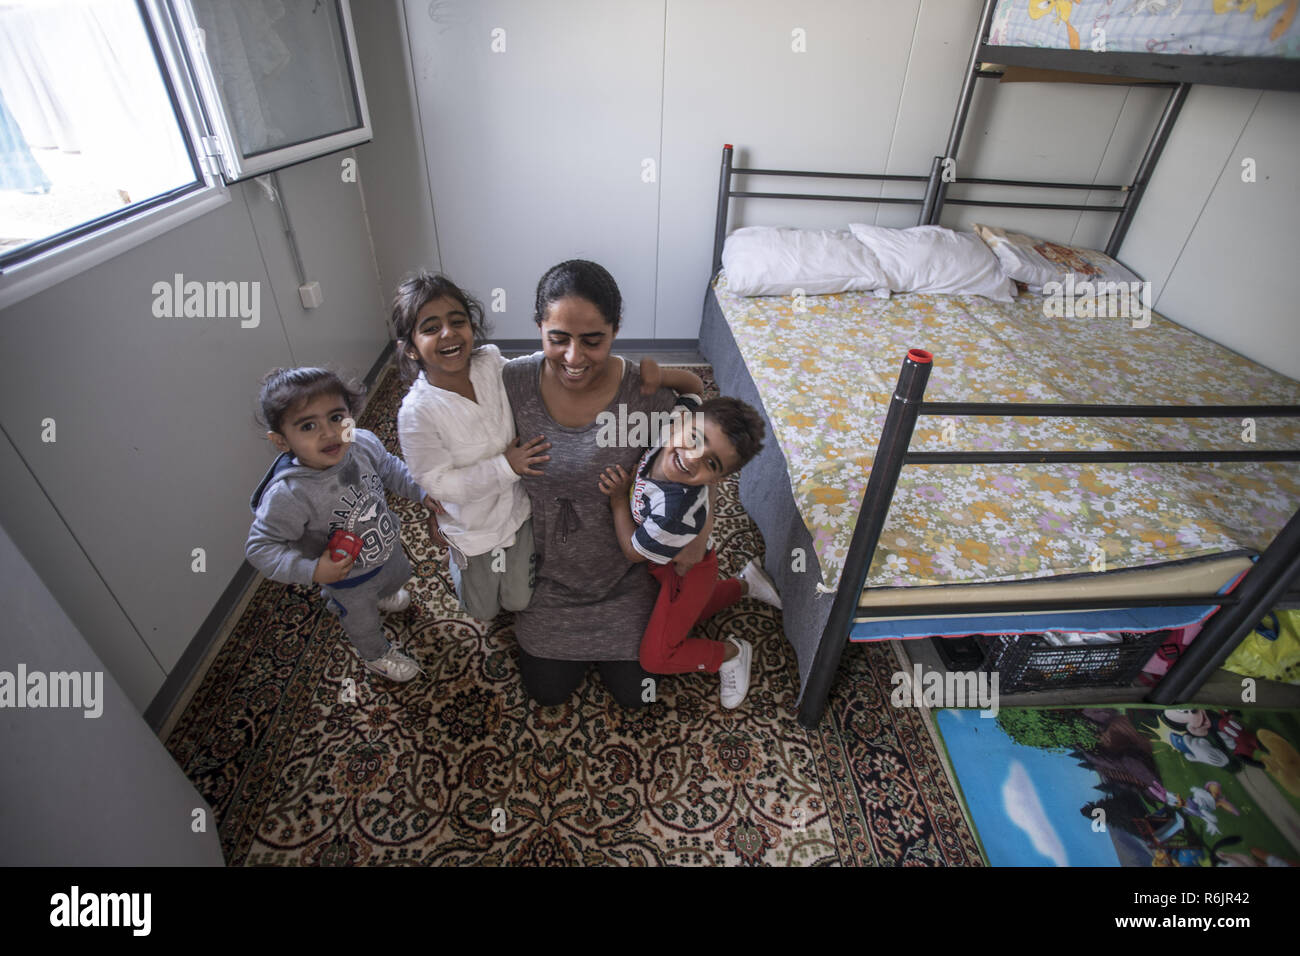 Diavata Refugee Camp High Resolution Stock Photography and Images - Alamy